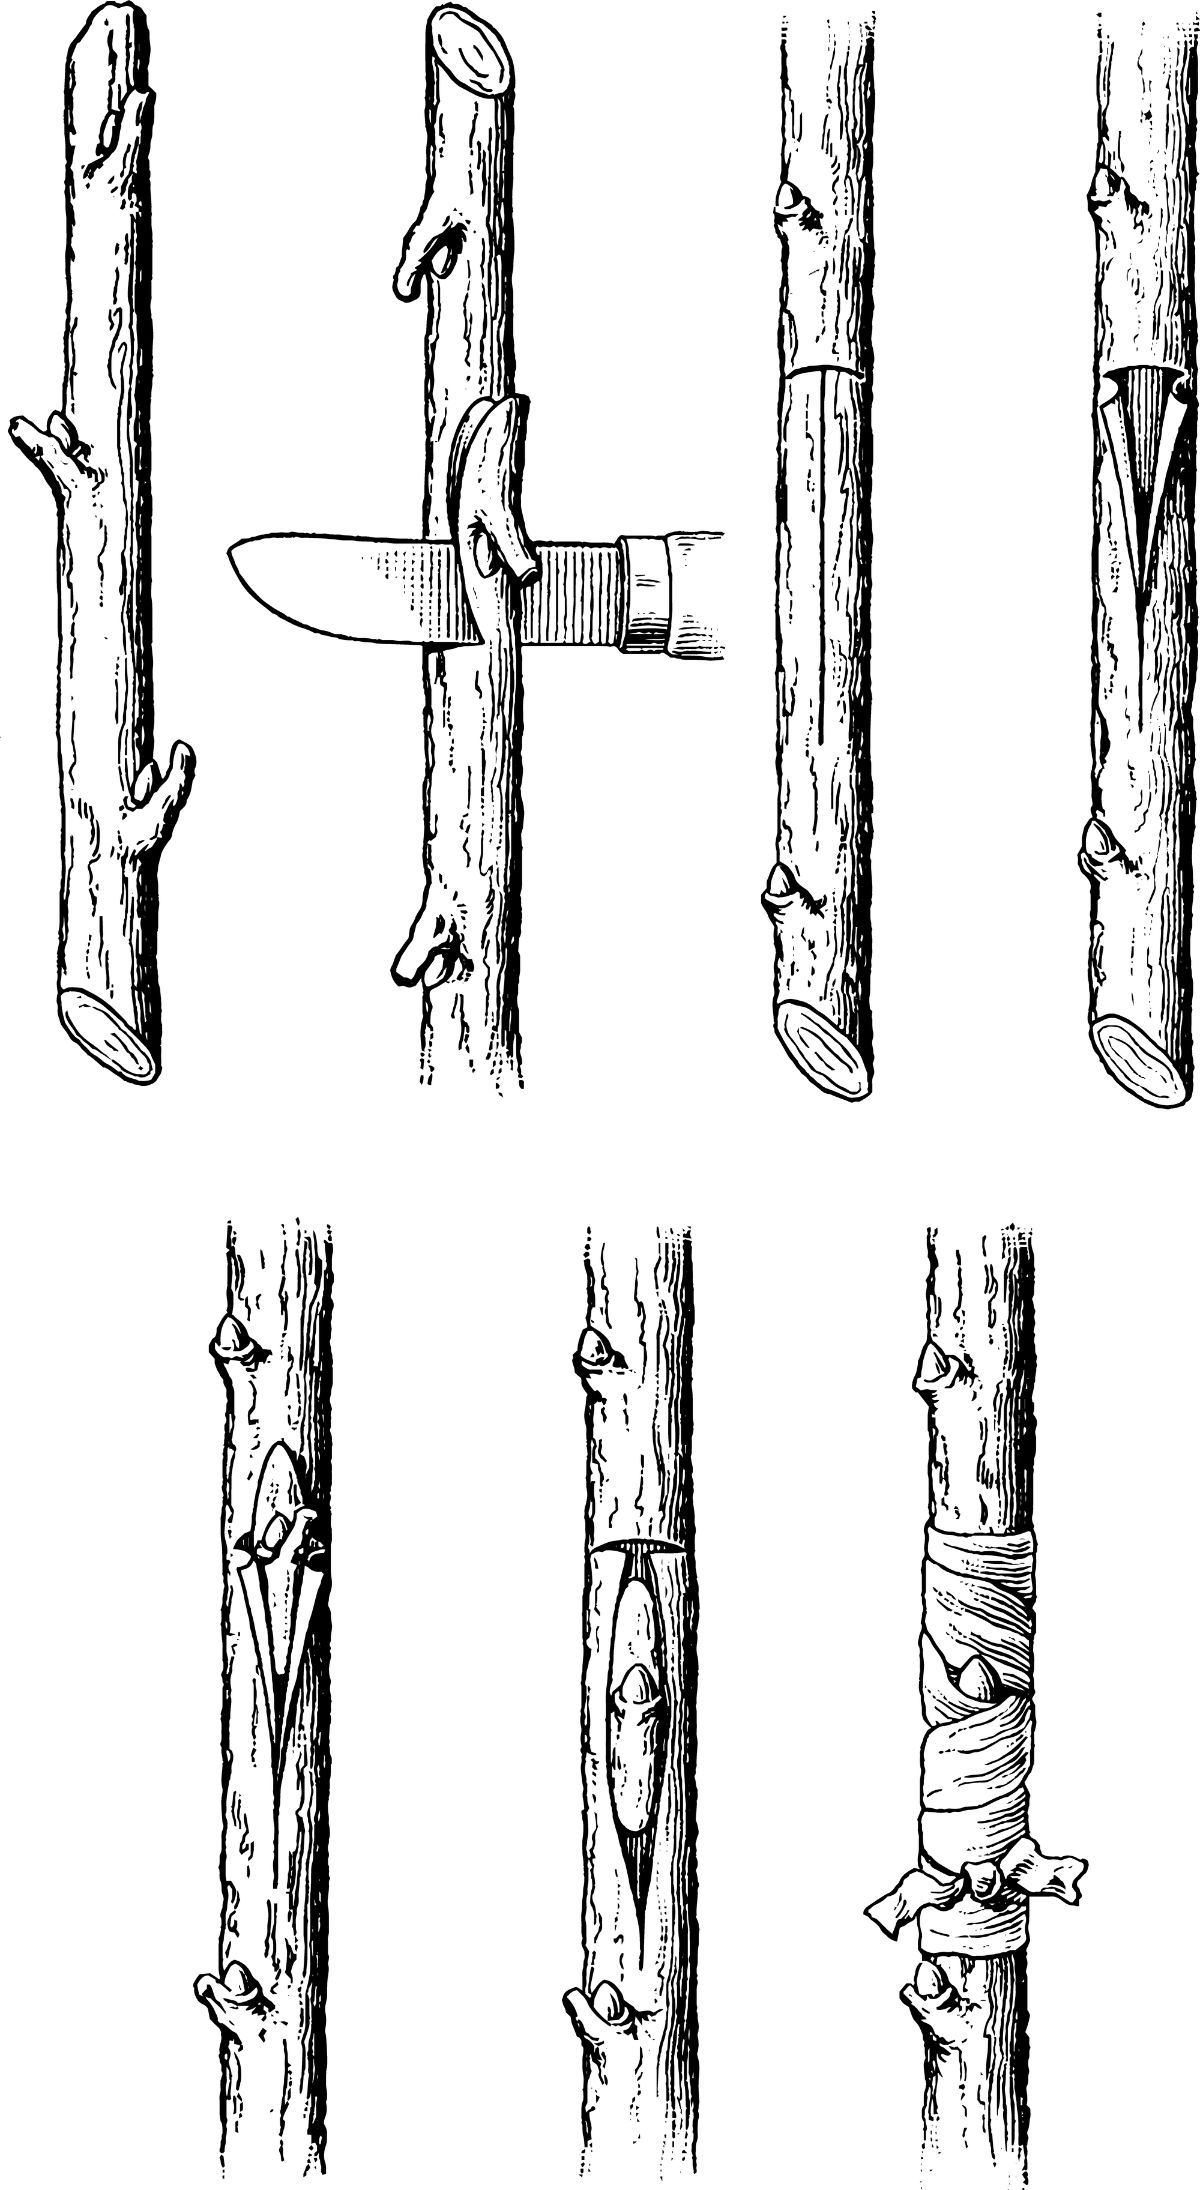 Diagram of T-bud graft how-to